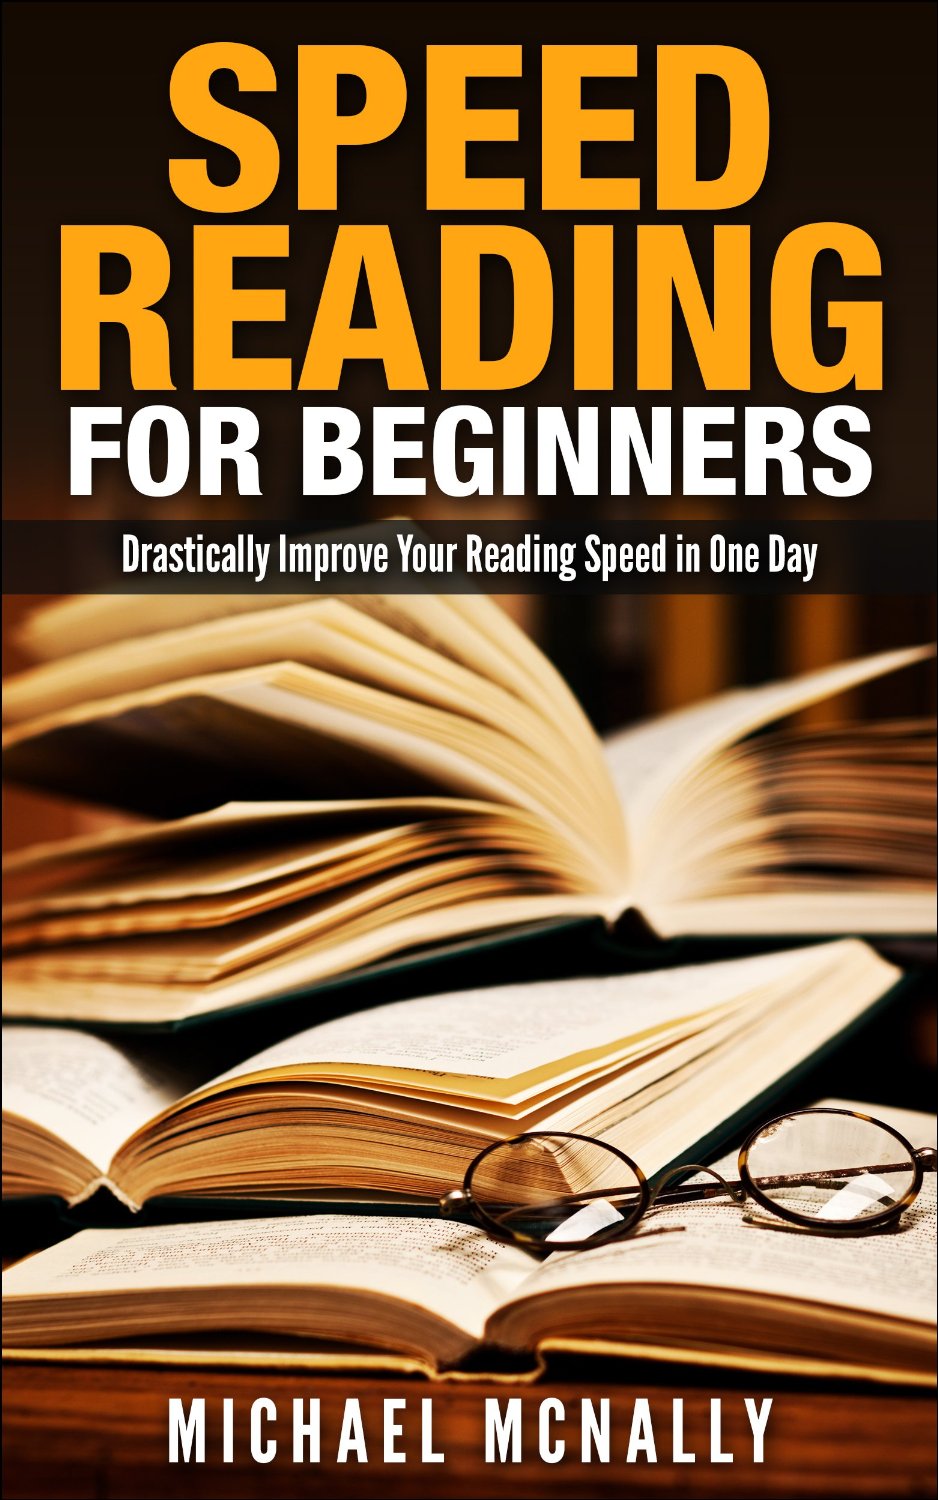 Speed Reading For Beginners by Michael  McNally